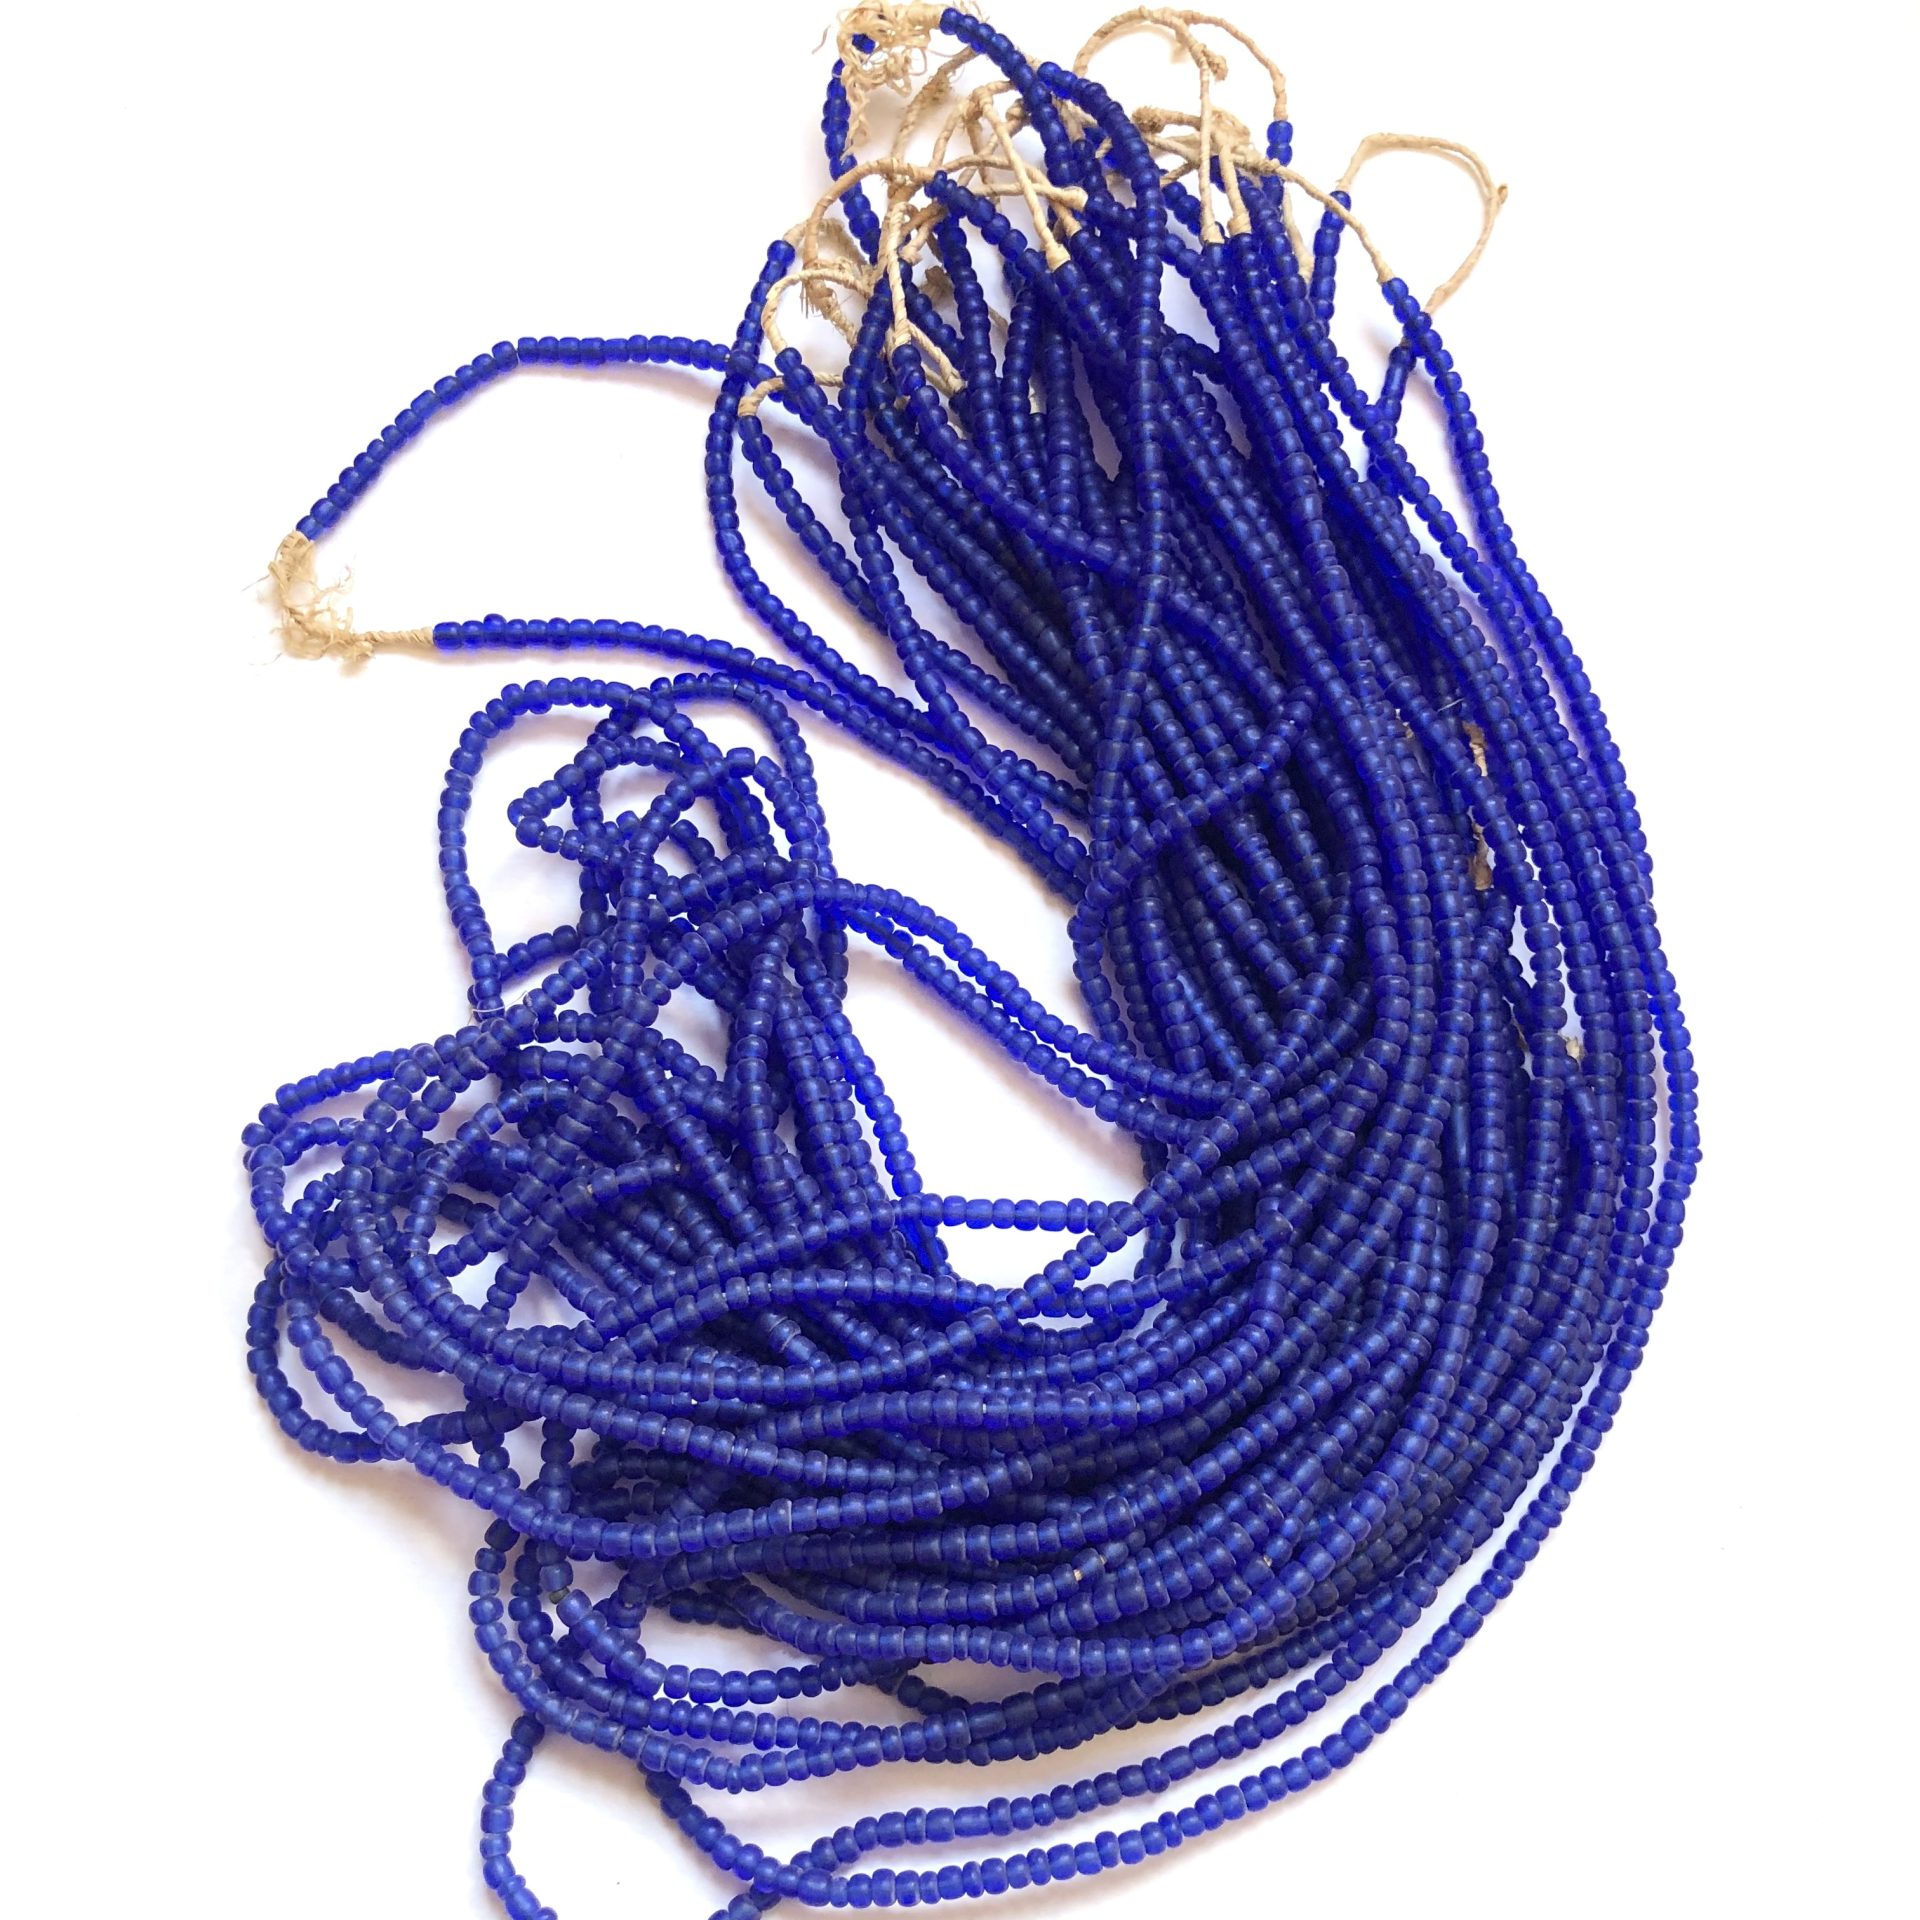 Translucent Royal Blue Small Glass Beads